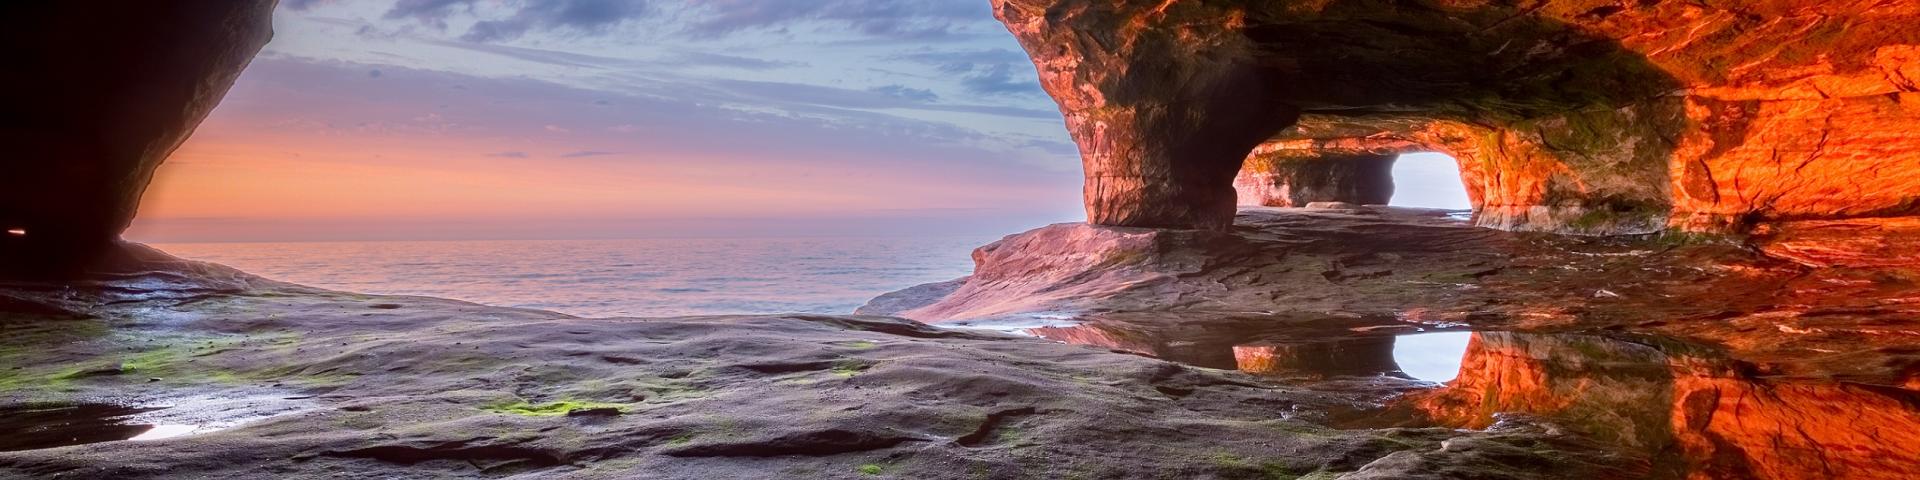 Apostle Islands caves in Lake Superior